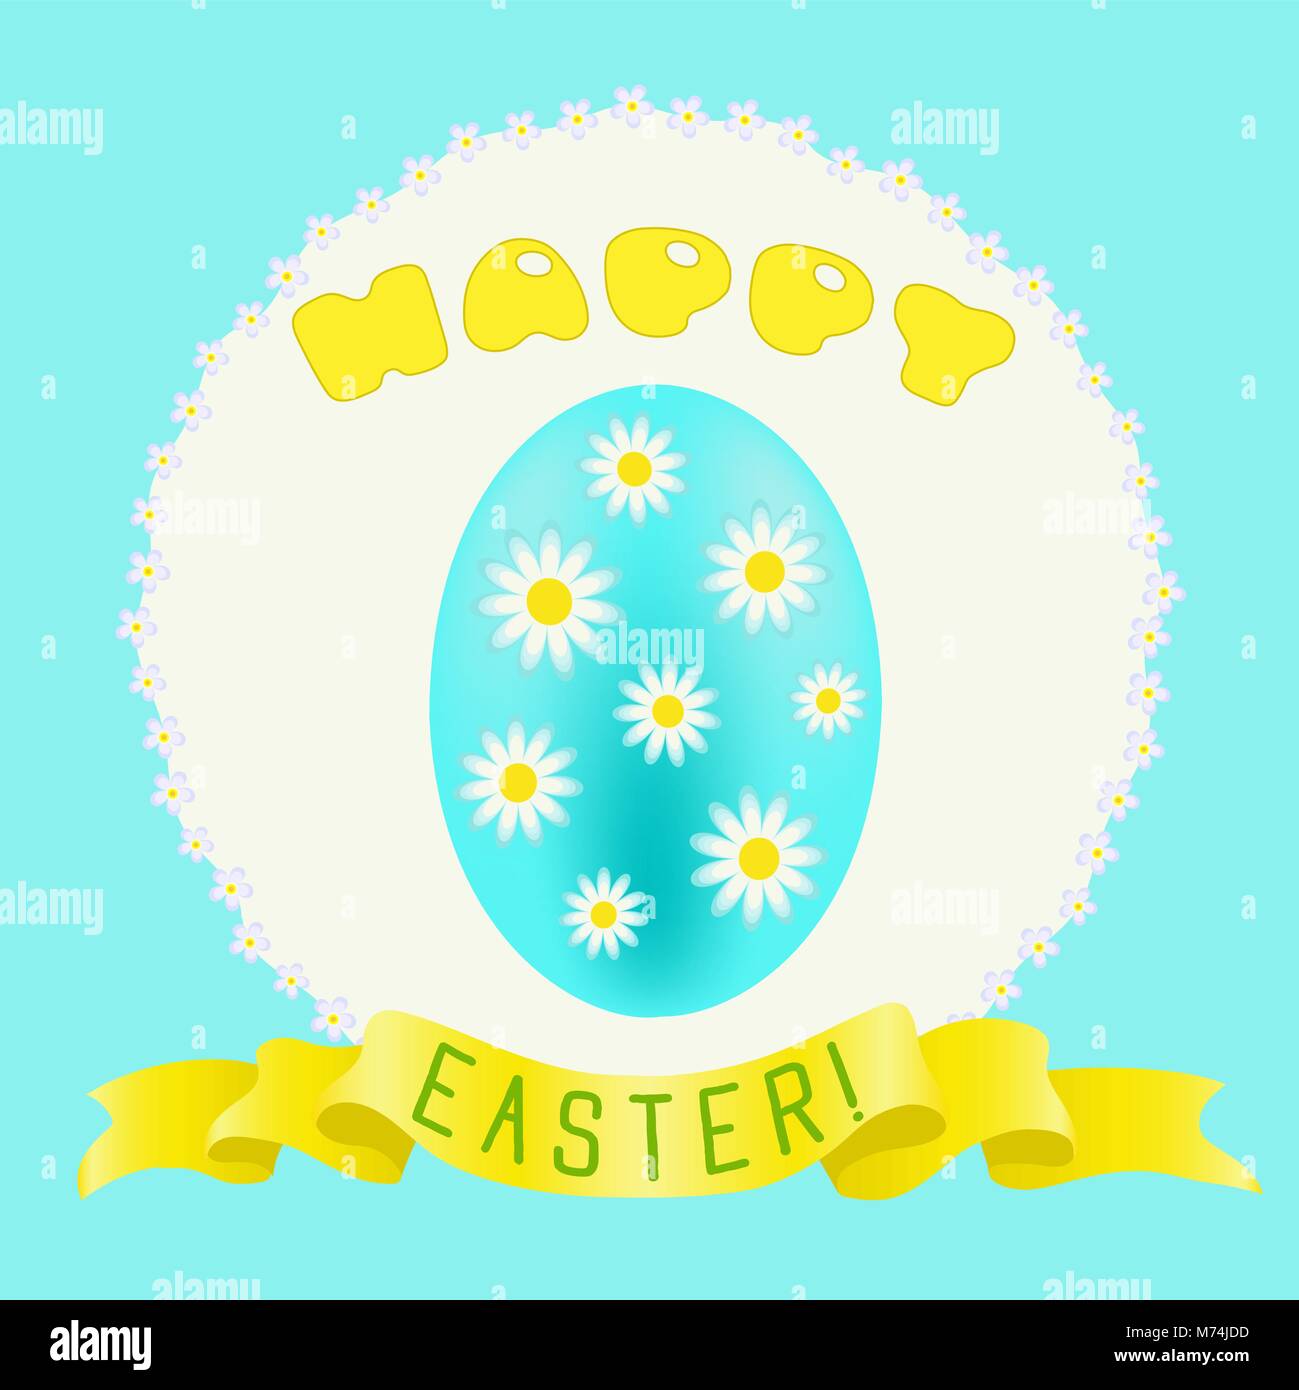 Happy Easter greeting with turquoise painted egg and golden ribbon Stock Vector